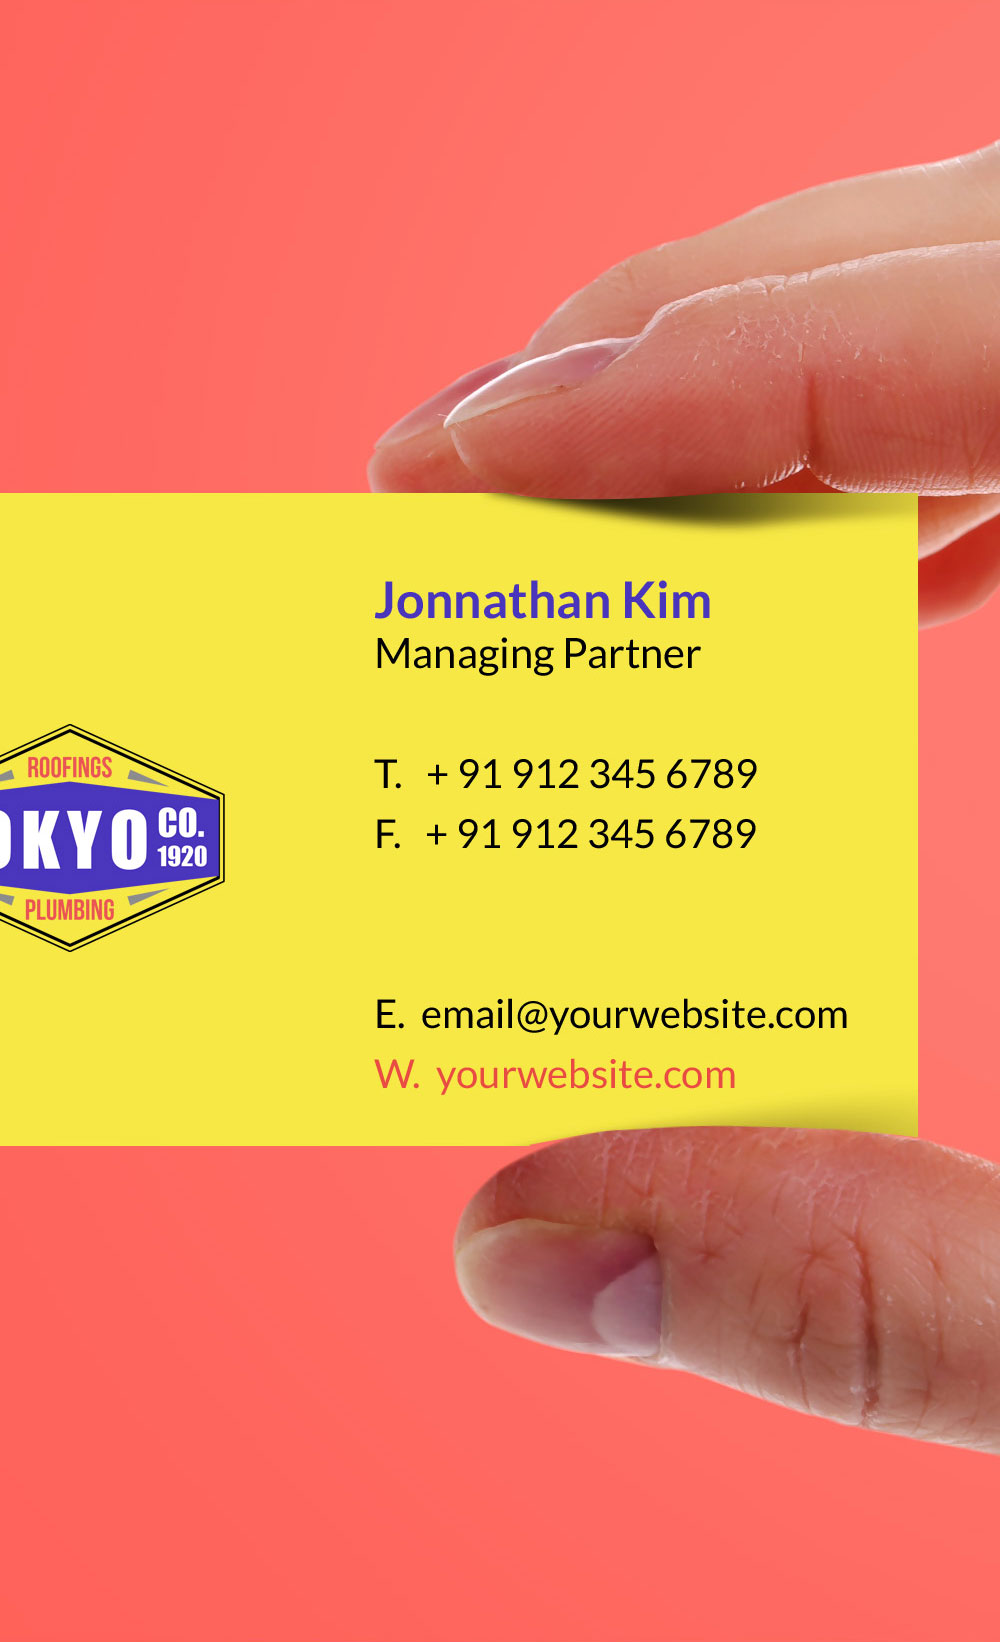 Mockup featuring a Hand Holding a Business Card FREE PSD